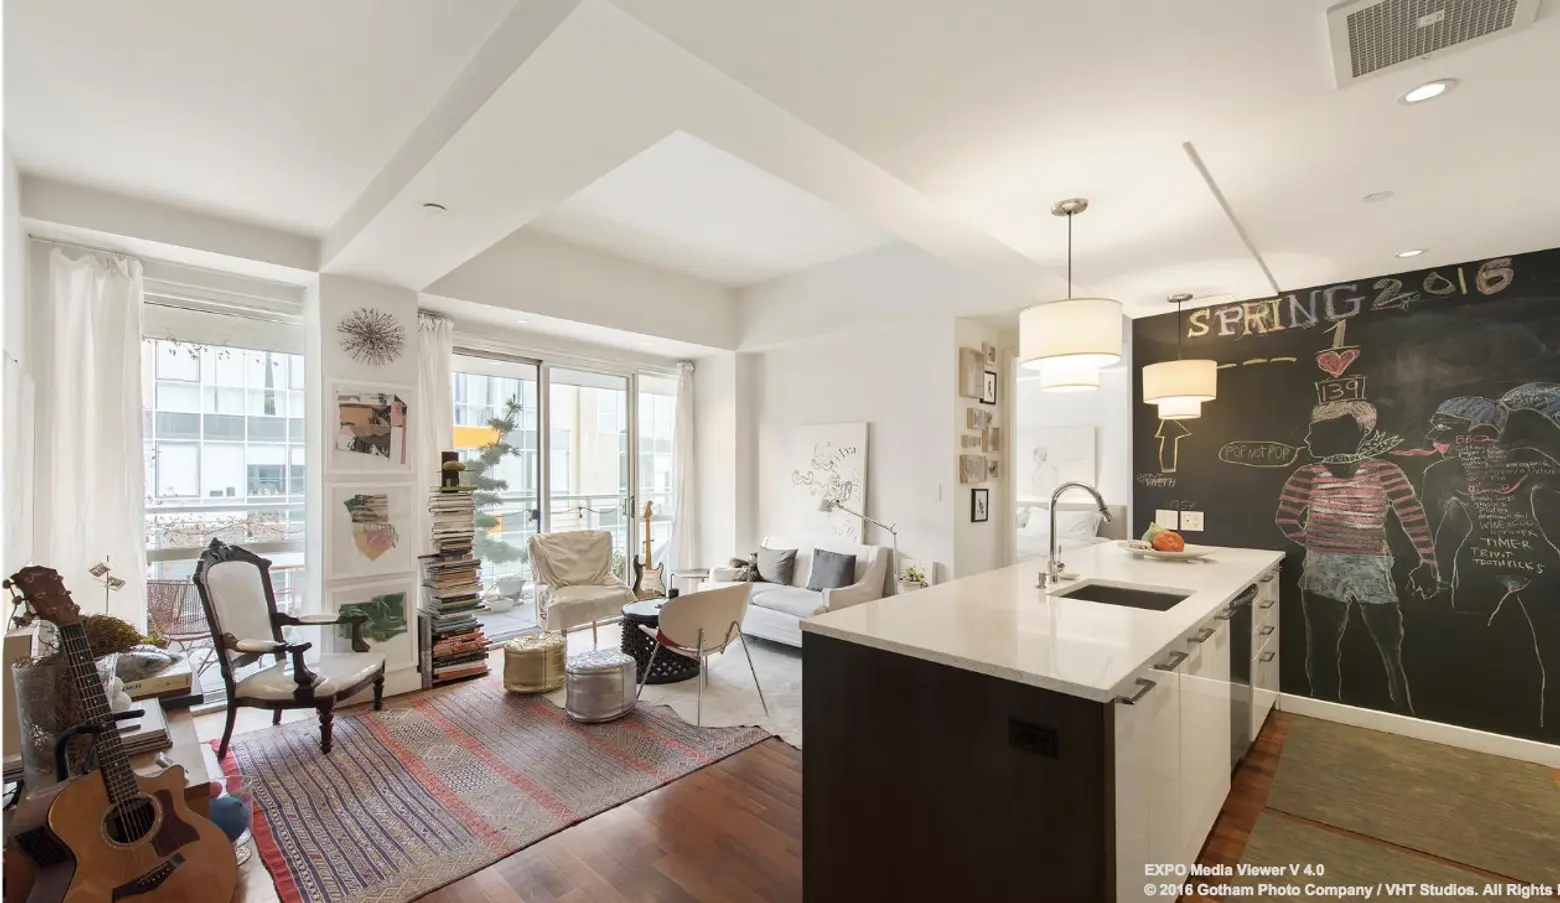 $1.4M Williamsburg Condo Comes With an Artist Studio and Private Rooftop Cabana